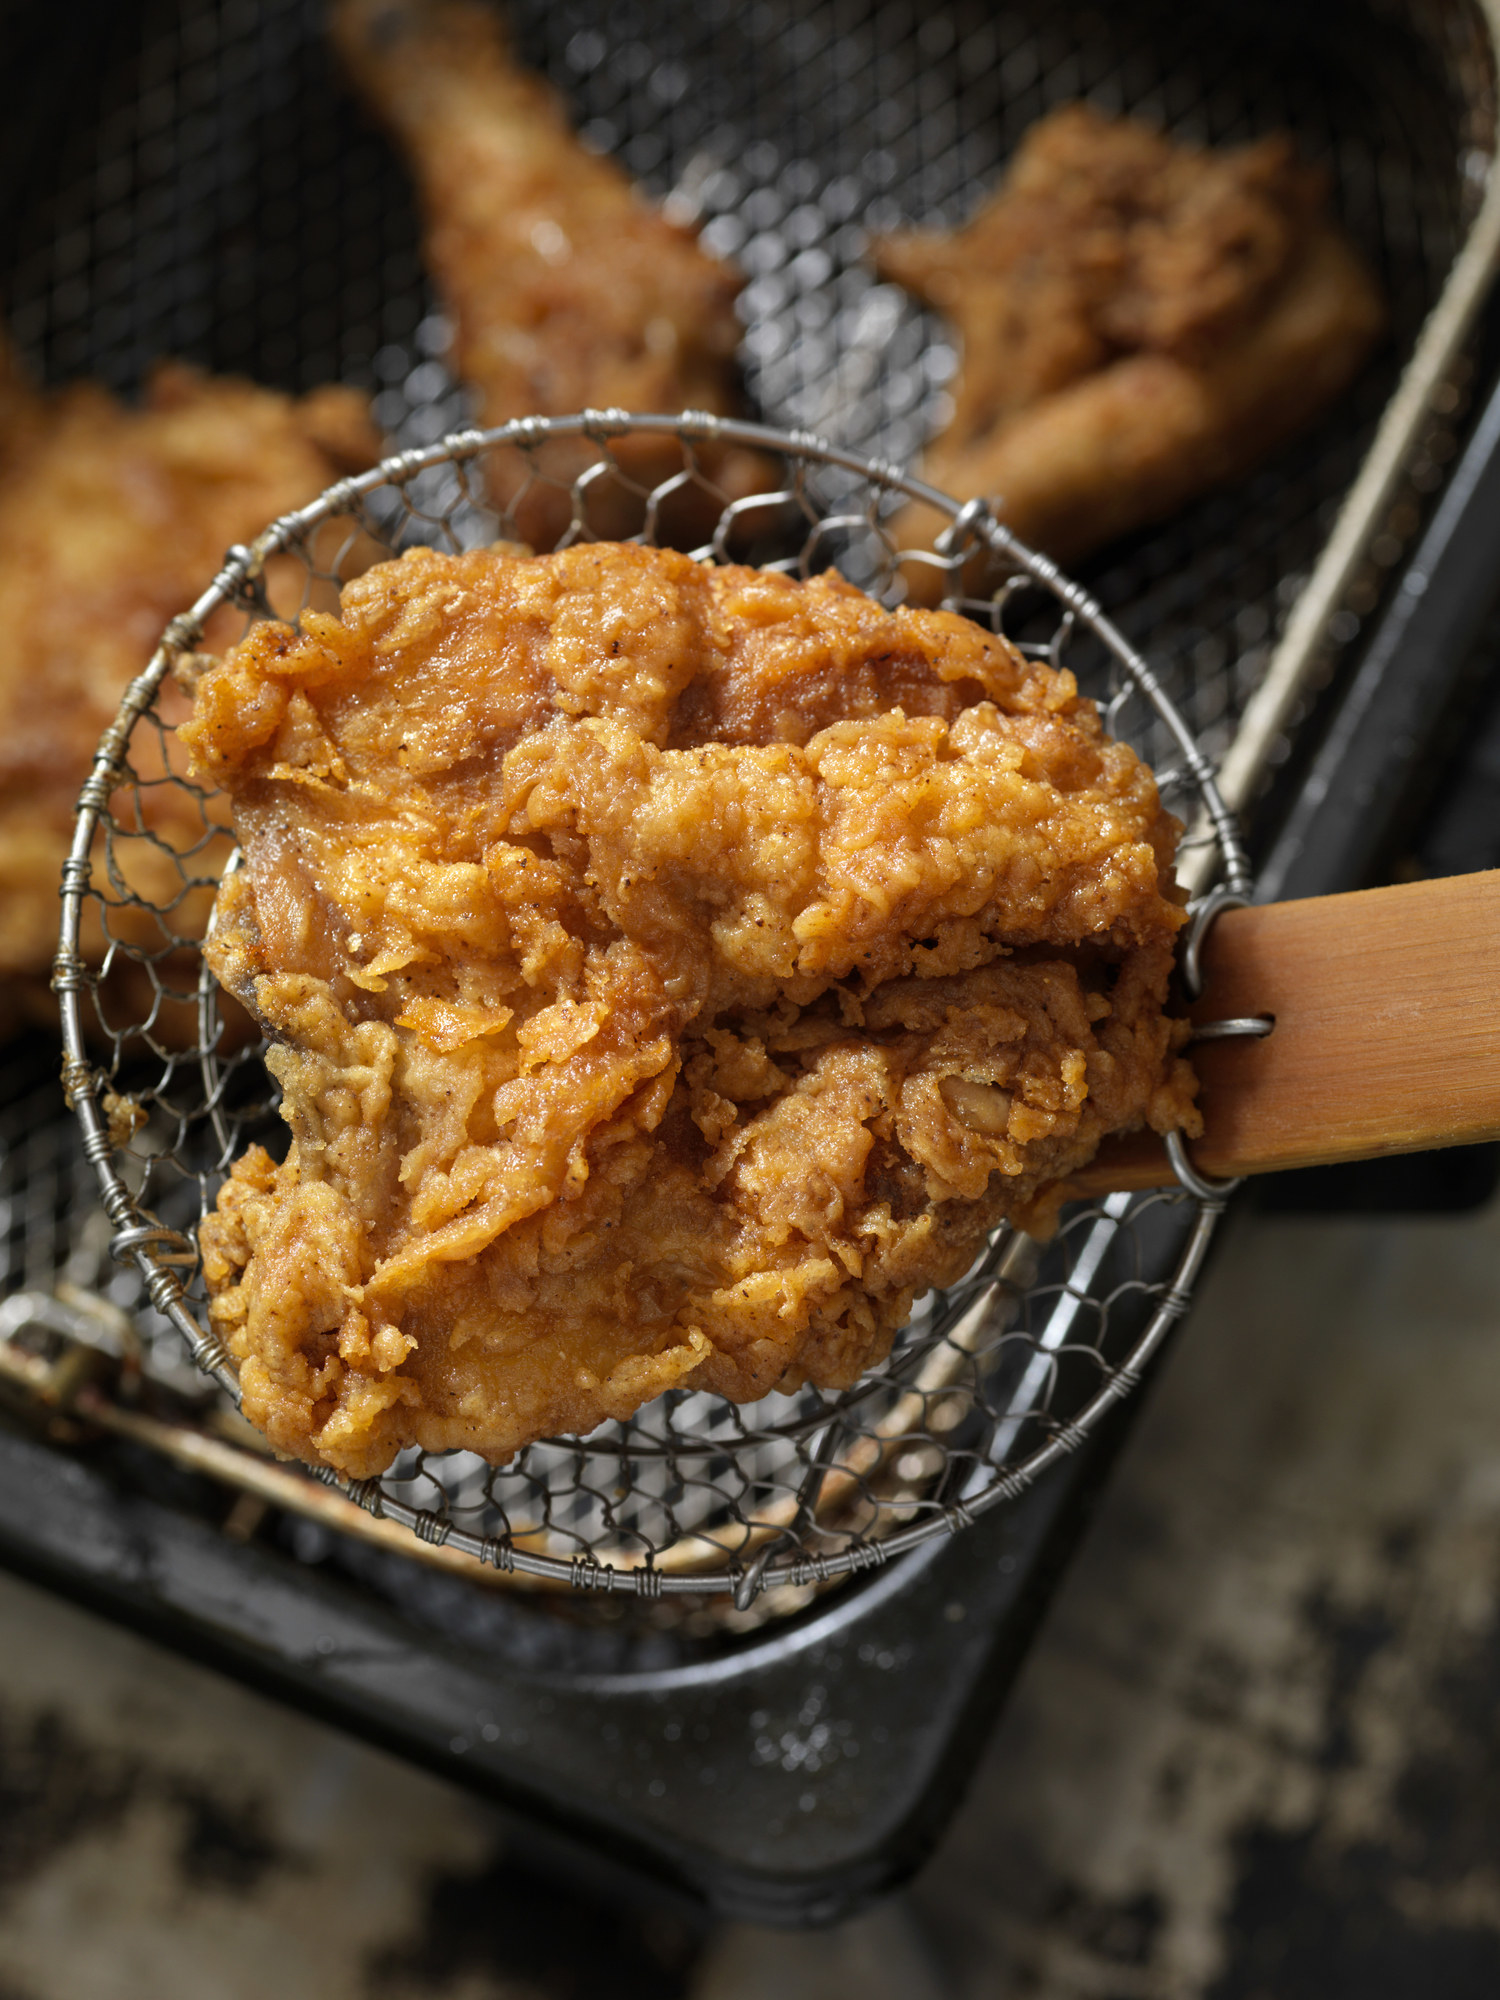 Removing fried chicken from oil